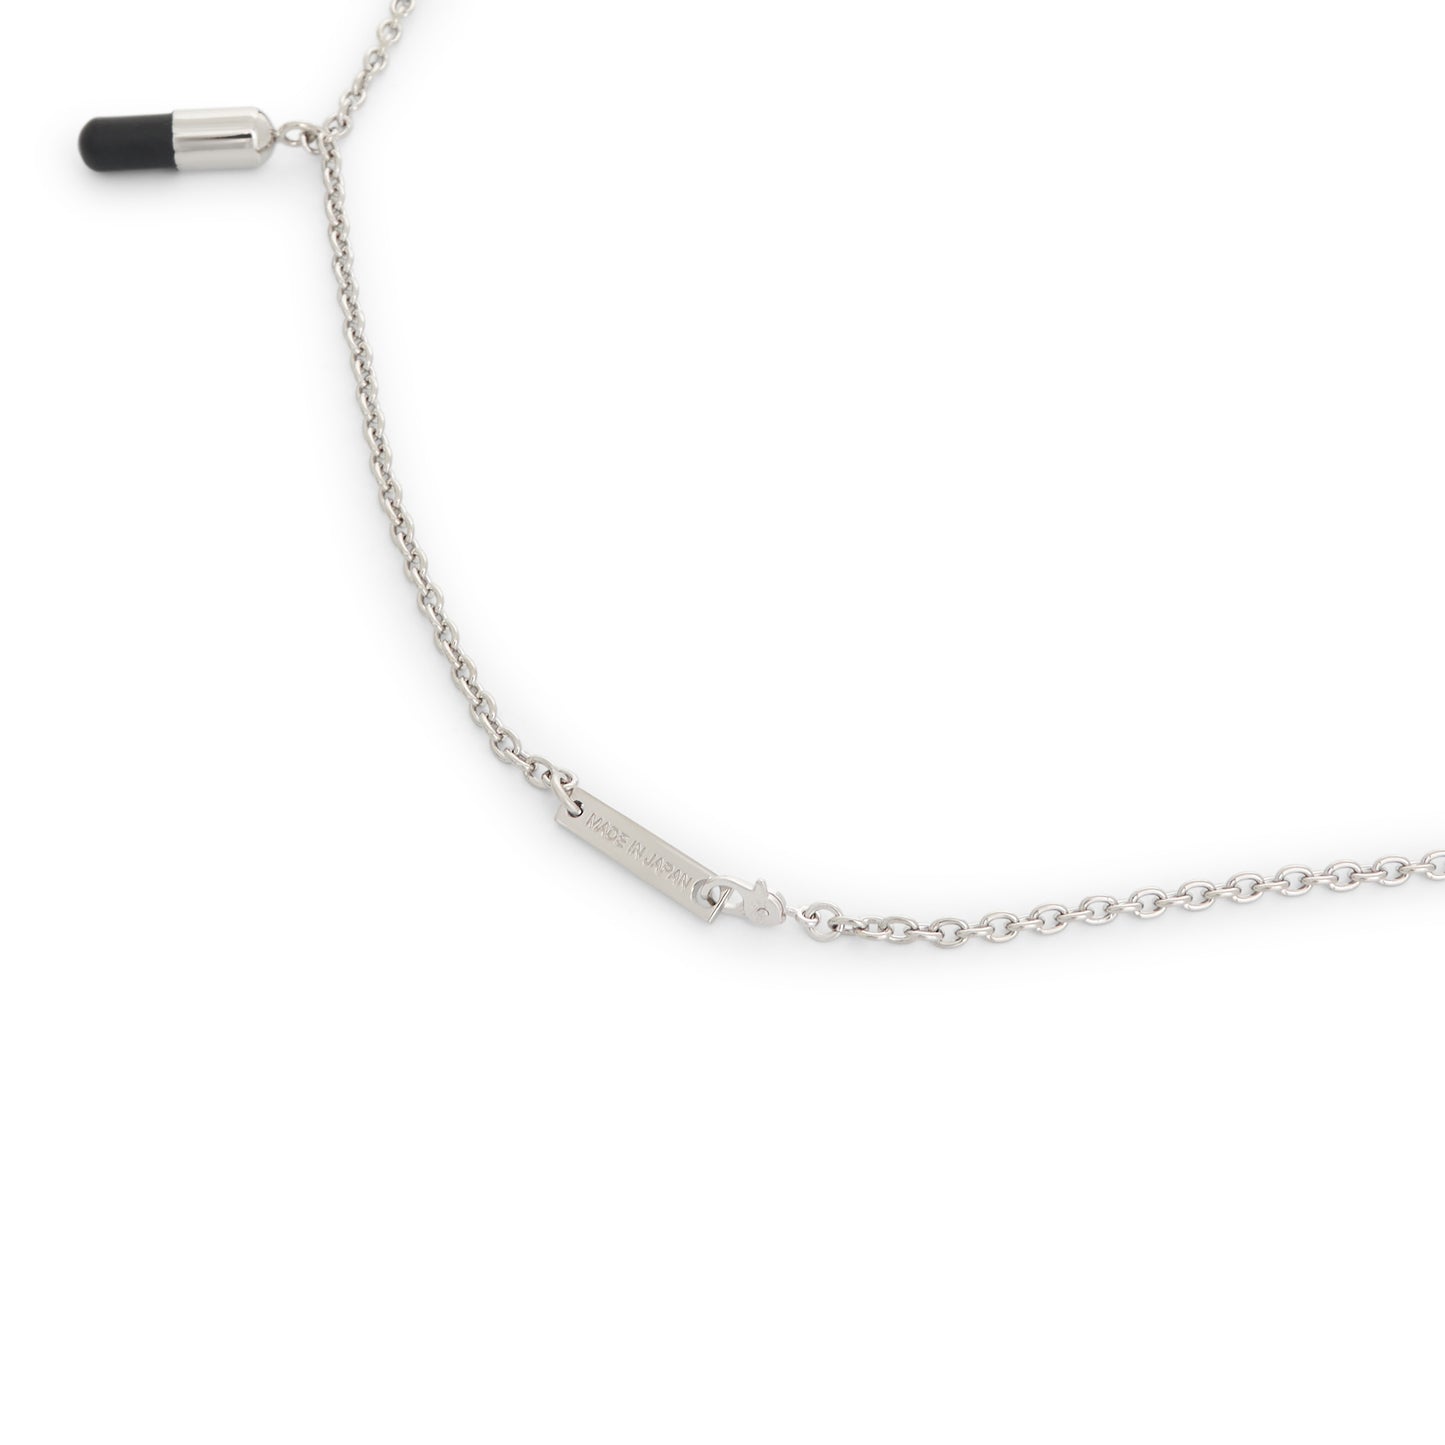 Multipill Charm Necklace in Silver/Black